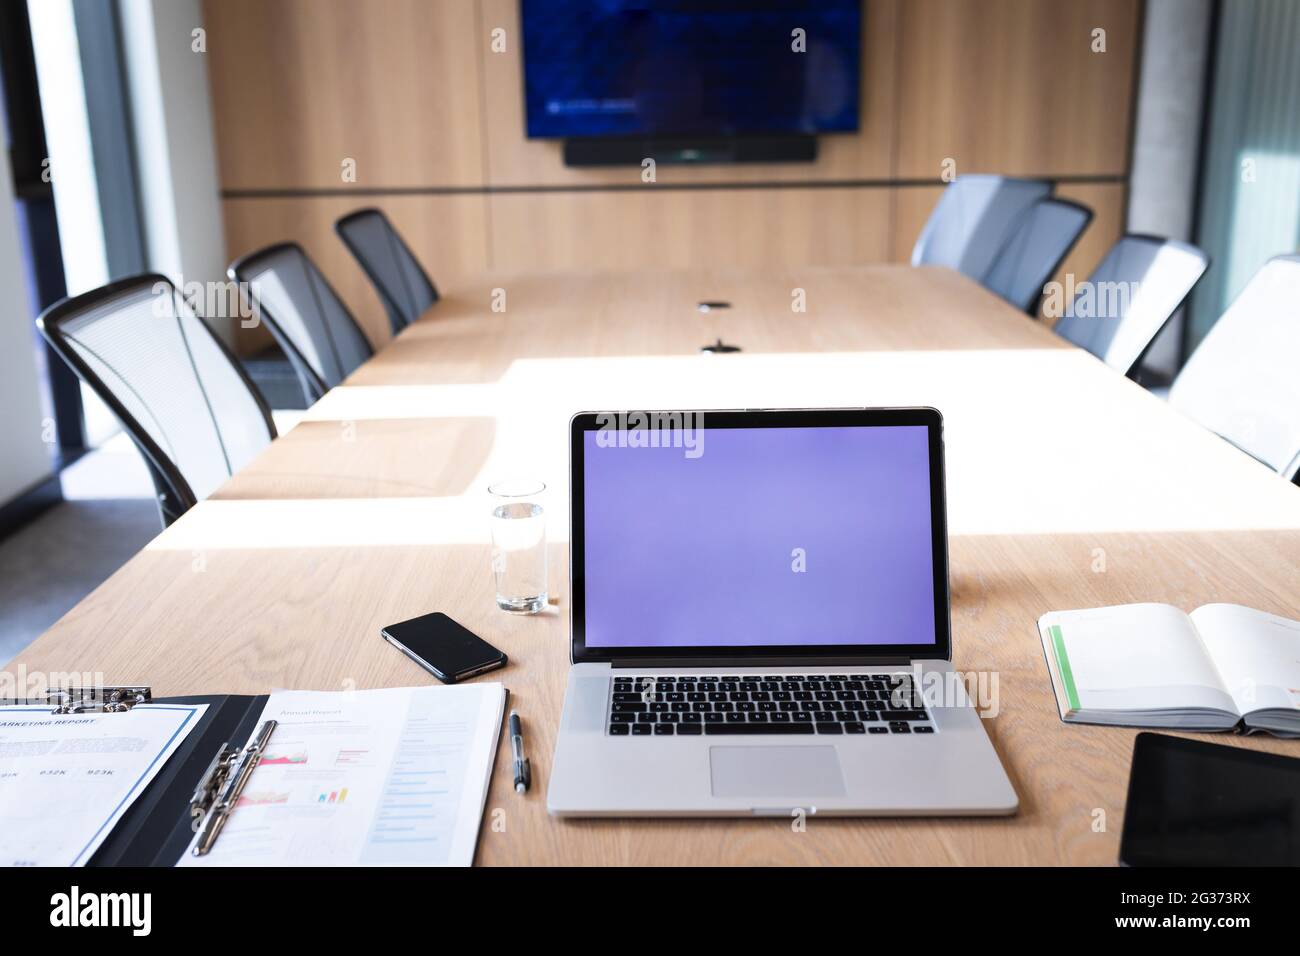 View of laptop and office equipment on wooden table in meeting room at modern office Stock Photo